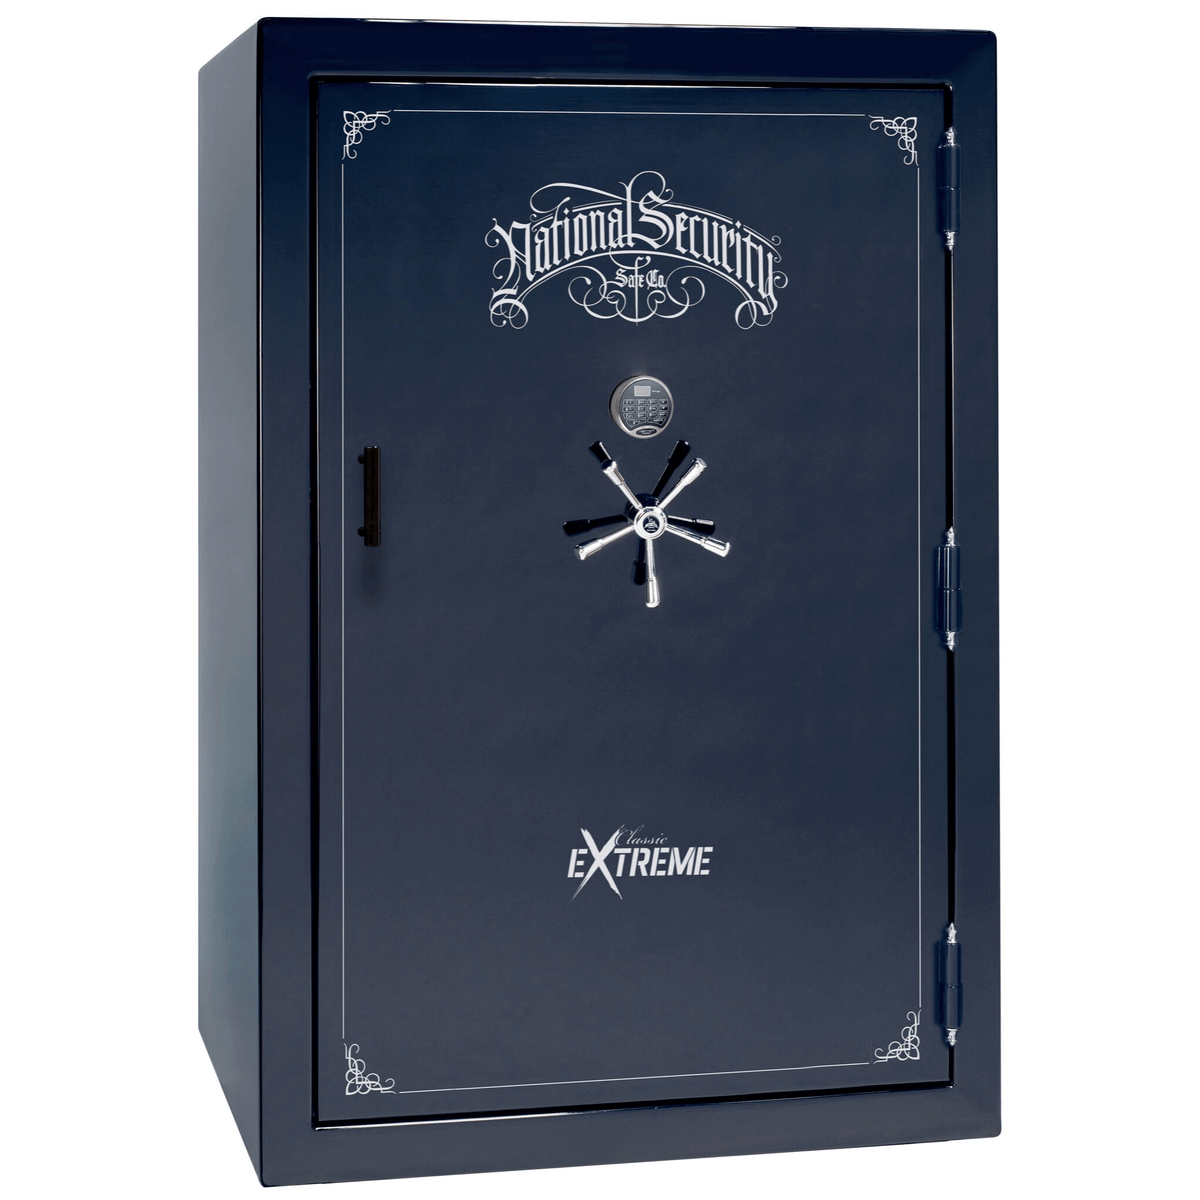 Classic Select Extreme Series | Level 6 Security | 90 Minute Fire Protection | Liberty Safe Norcal.